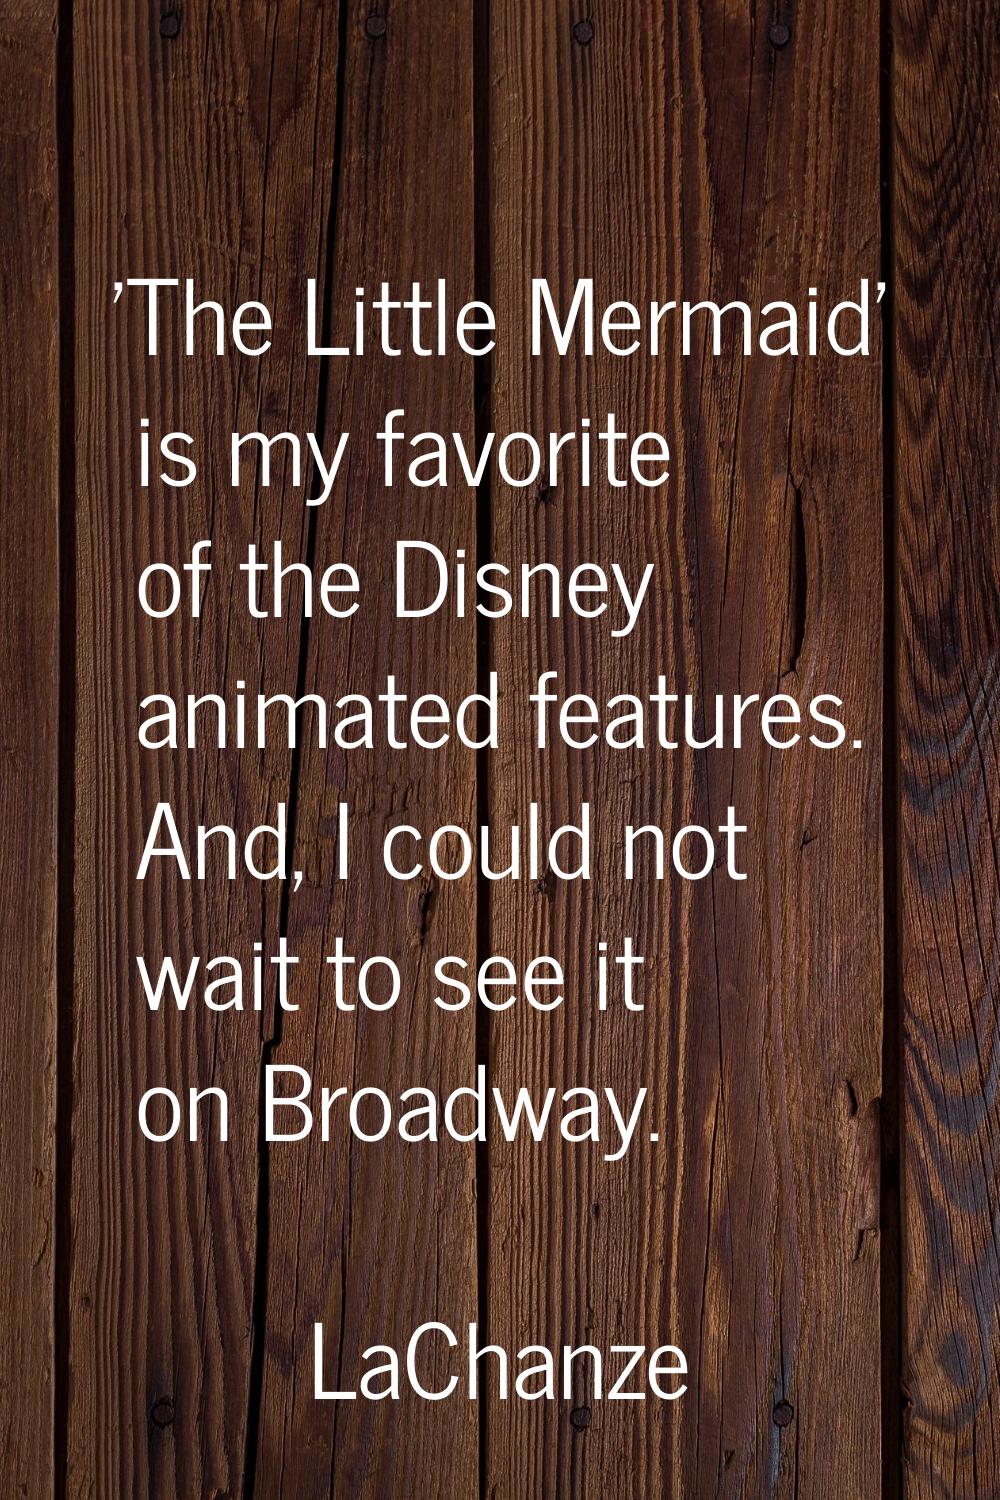 'The Little Mermaid' is my favorite of the Disney animated features. And, I could not wait to see i